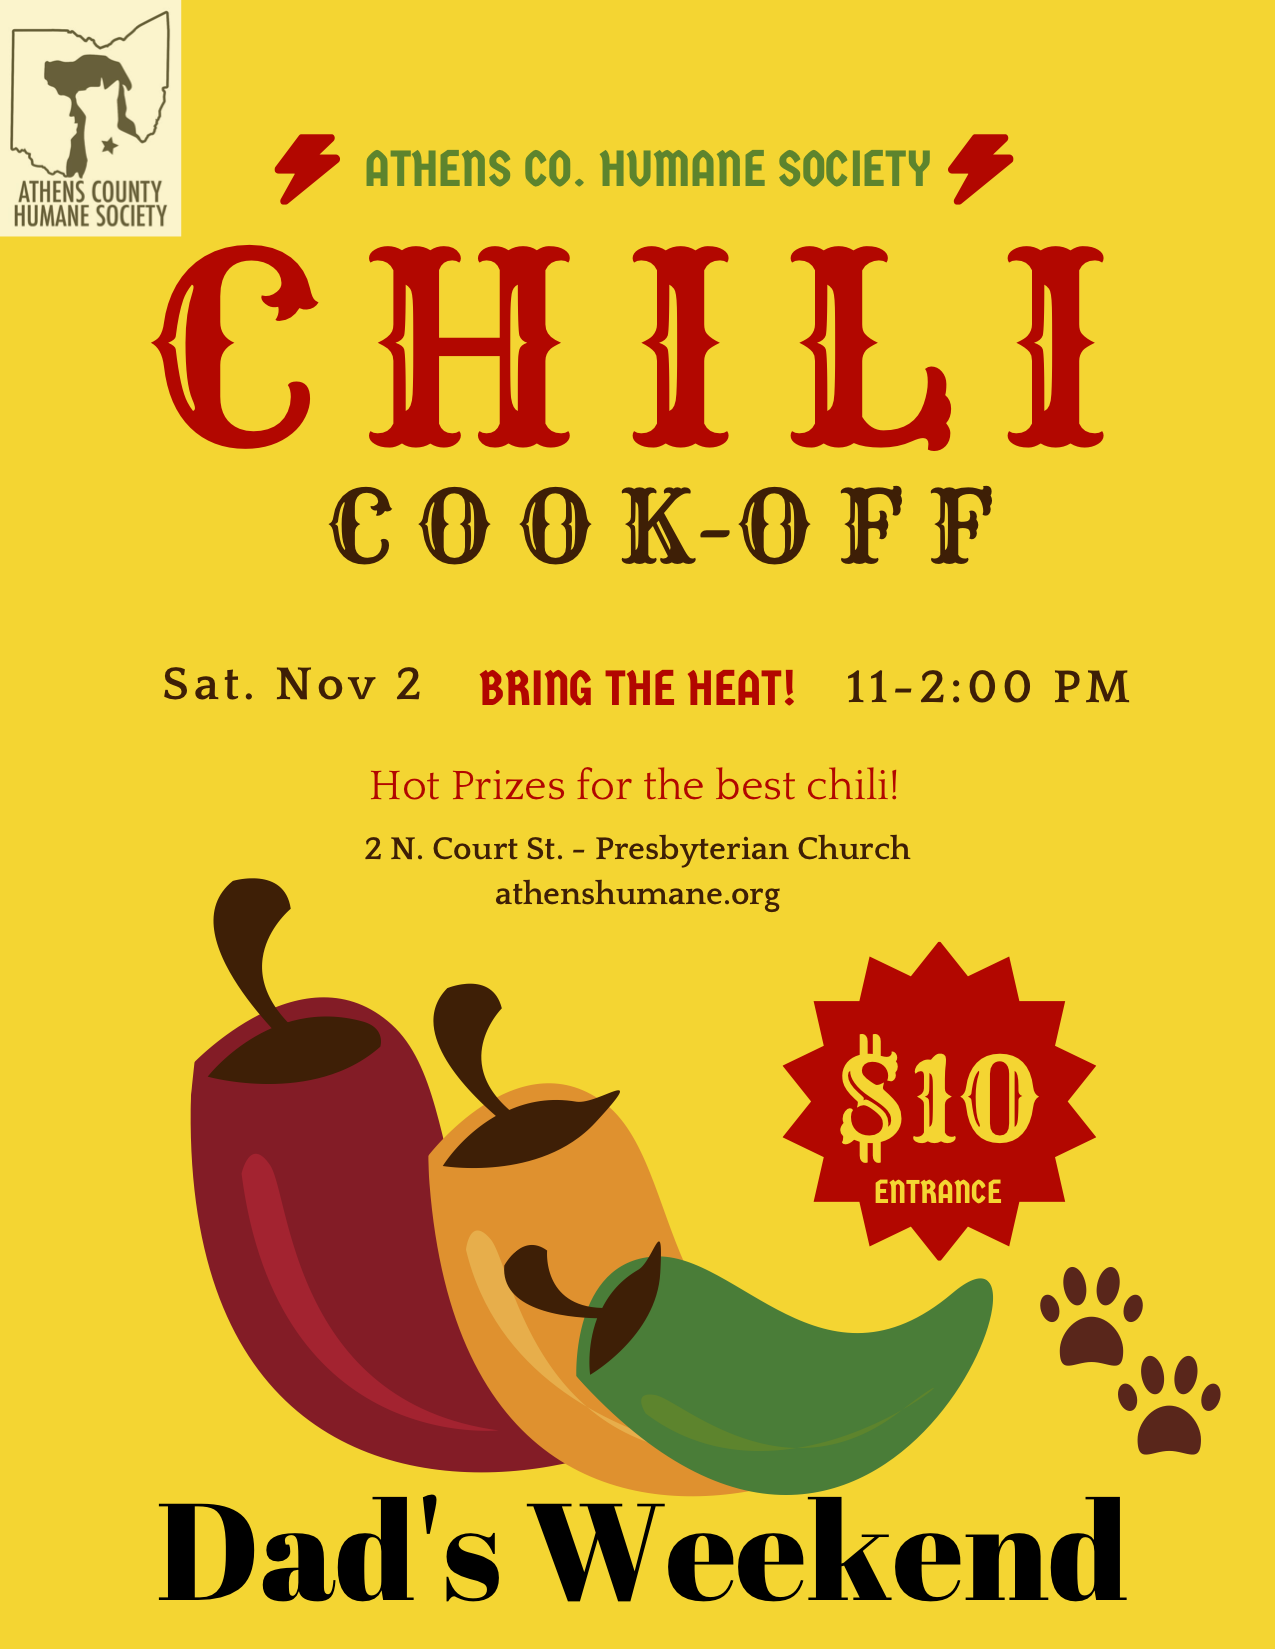 Athens County Humane Society Chili Cookoff WOUB Public Media